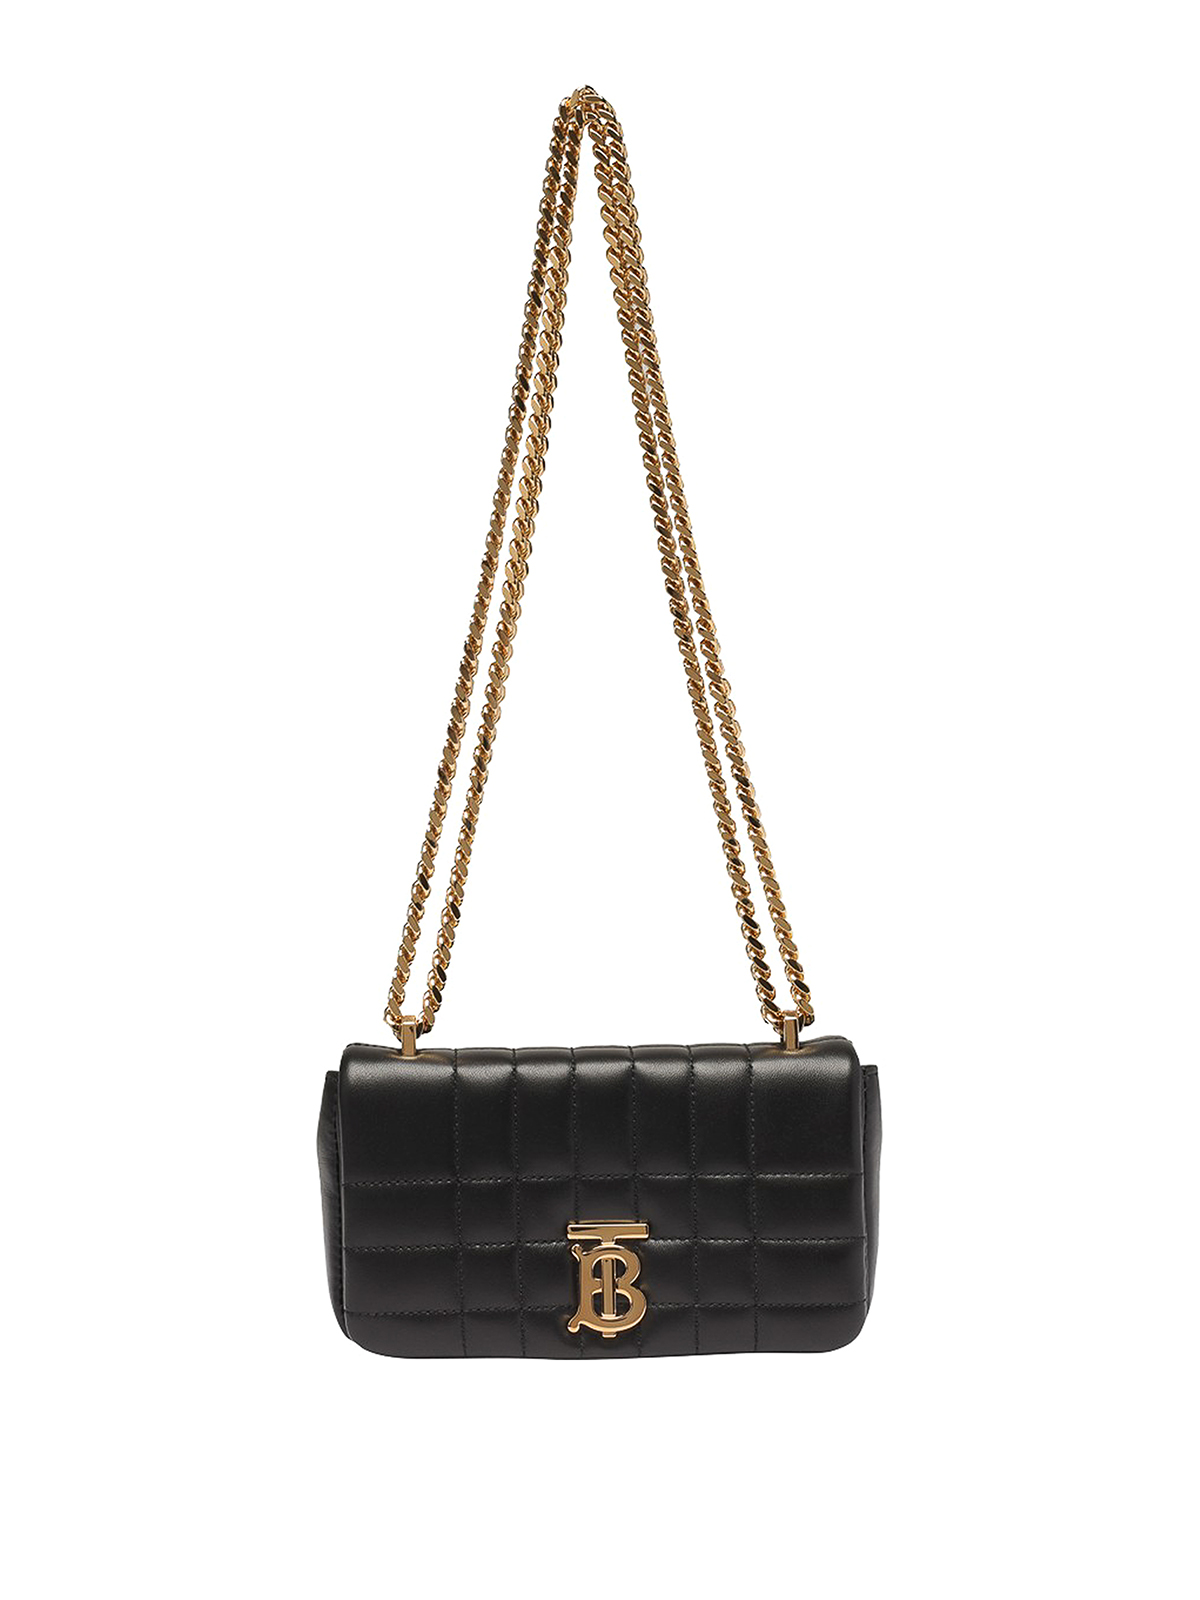 Burberry Quilted Leather Bag With Plaque Logo In Black